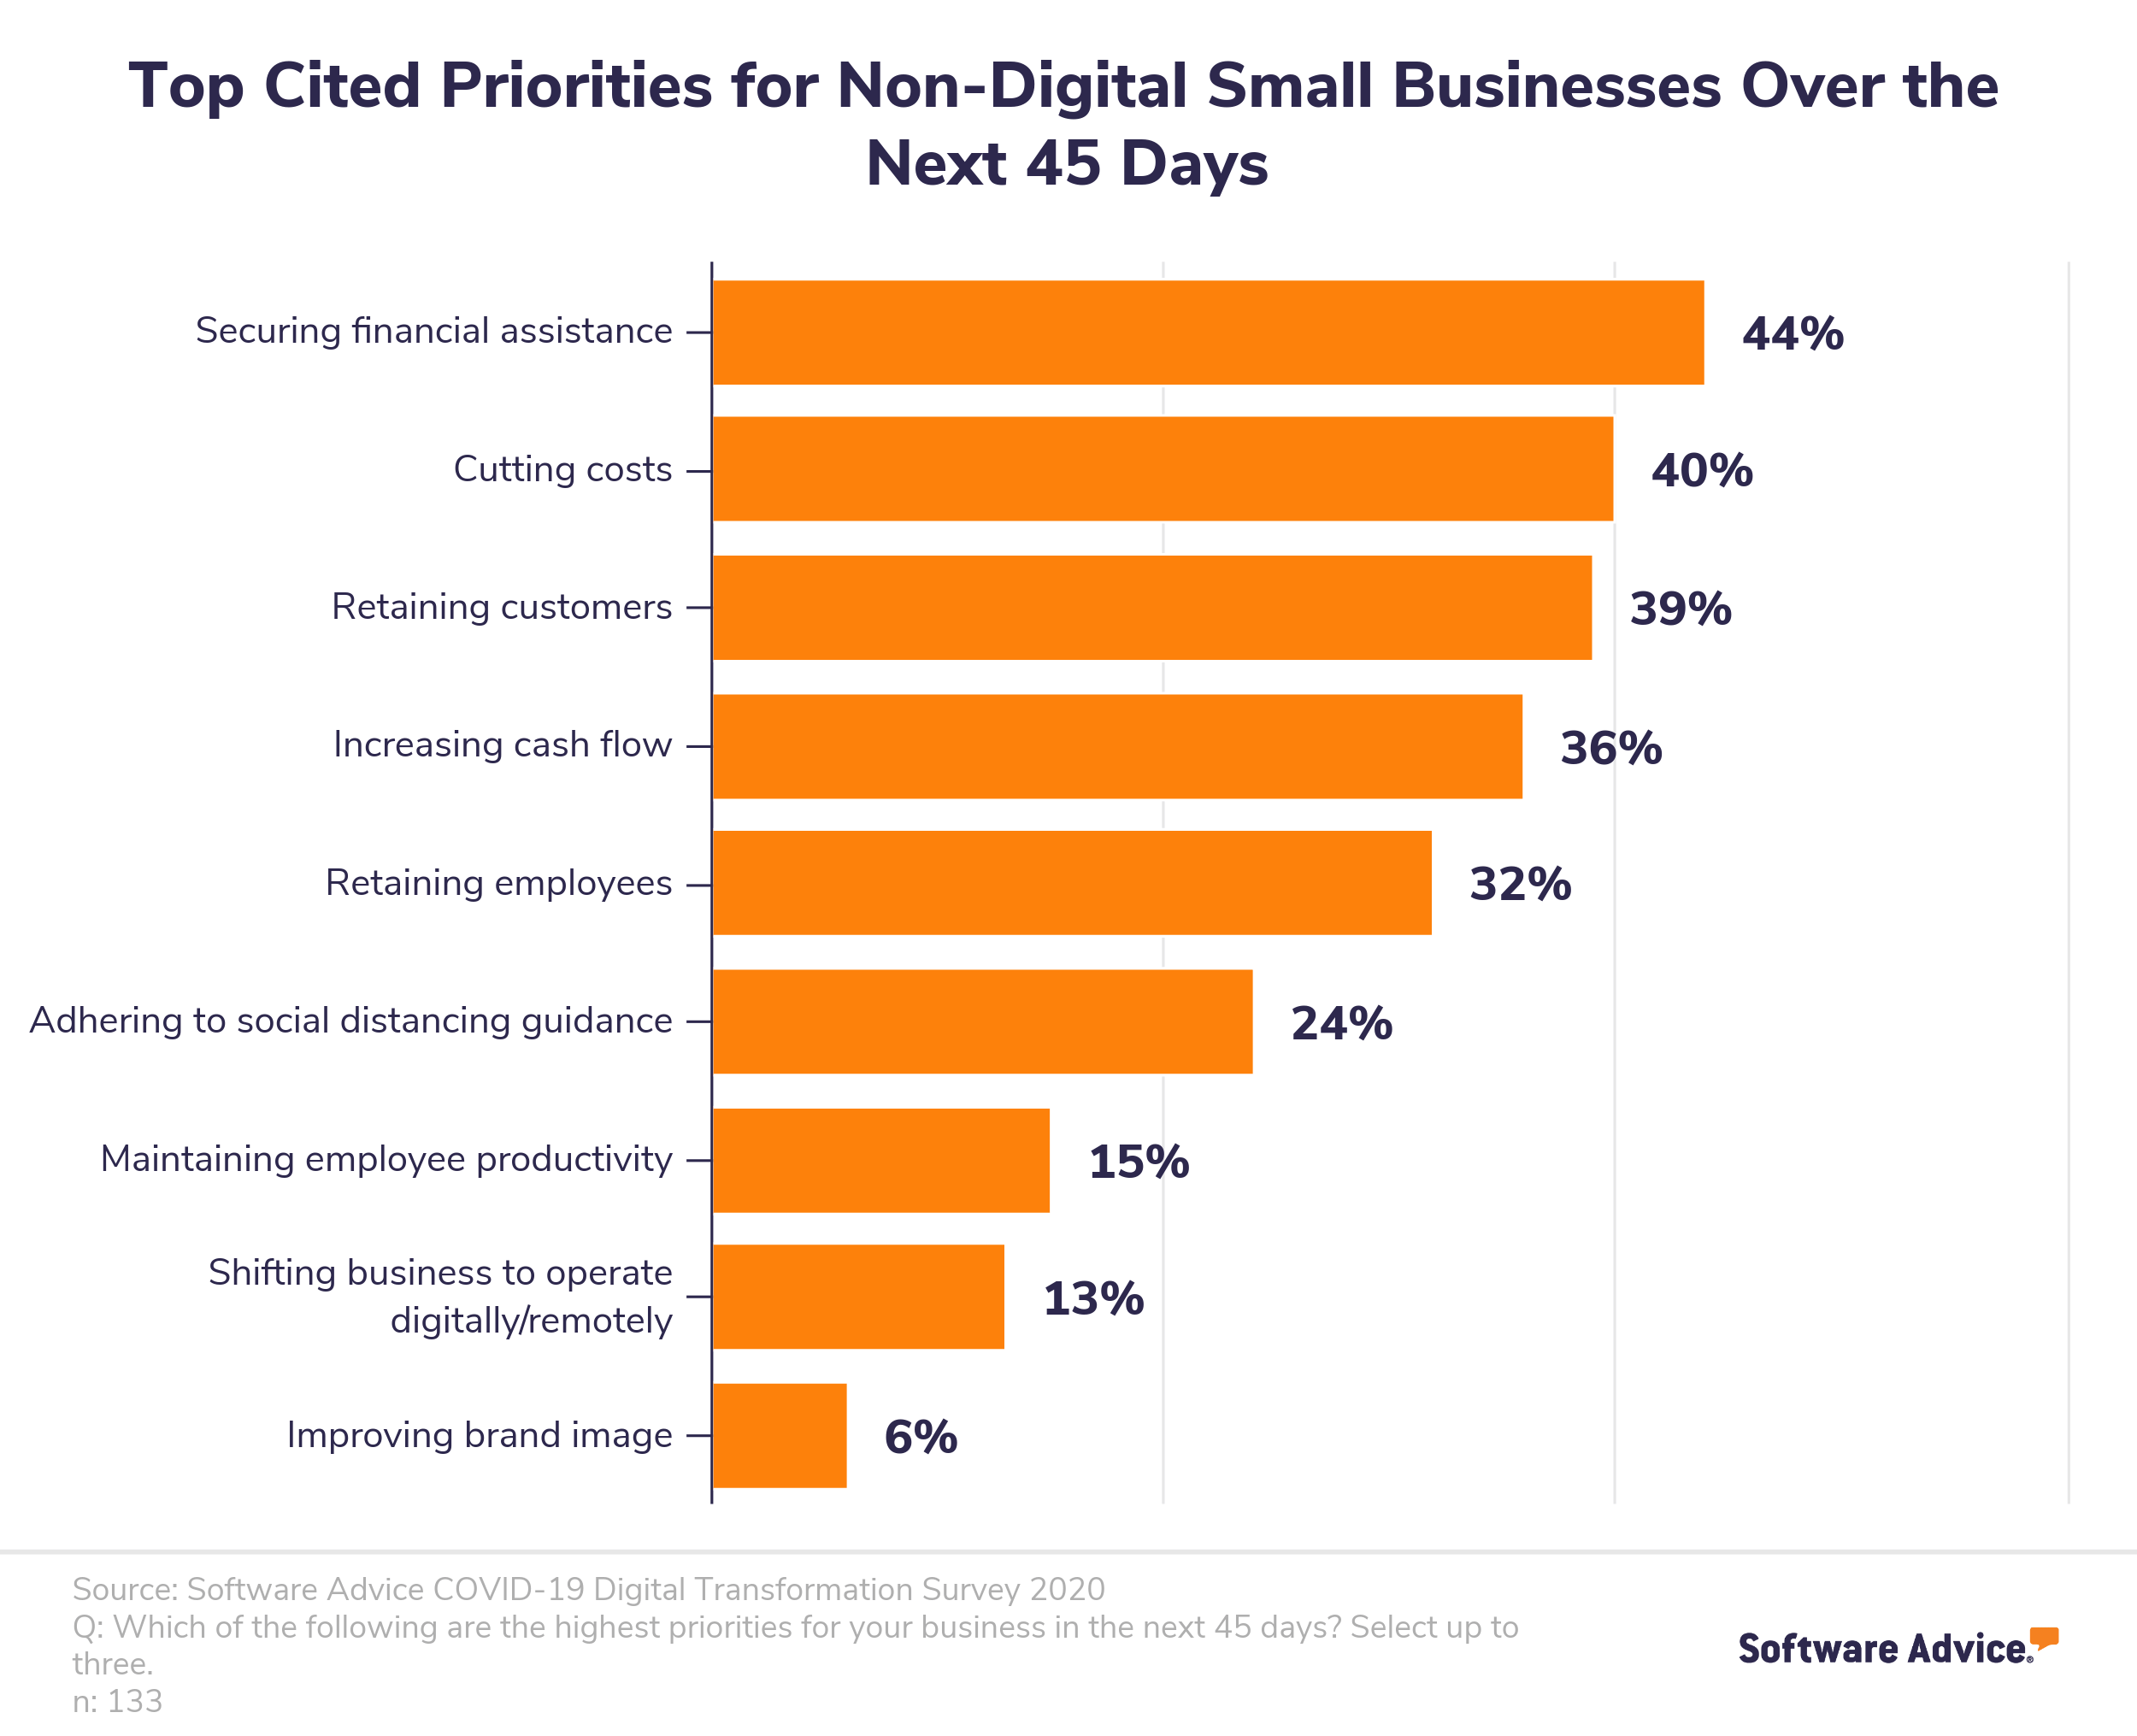 Bar-chart-showing-the-top-priorities-for-non-digital-small-businesses-over-the-next-45-days-due-to-COVID-19.